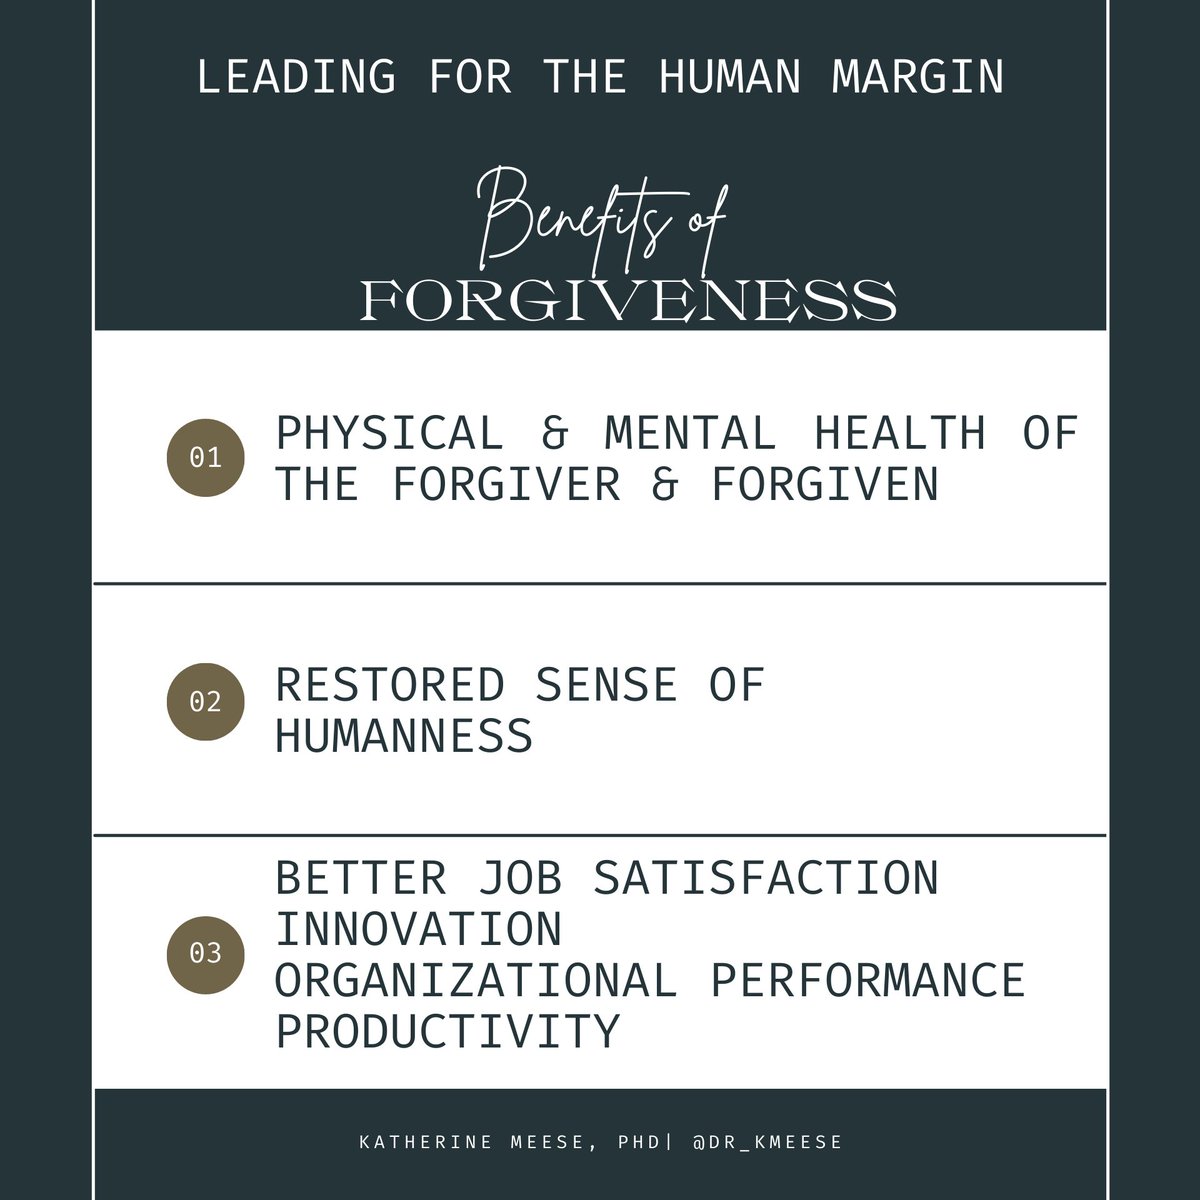 Check out the latest article in my newsletter: The Organizational Case for Forgiveness: Lessons from Rwanda linkedin.com/pulse/organiza… via @LinkedIn